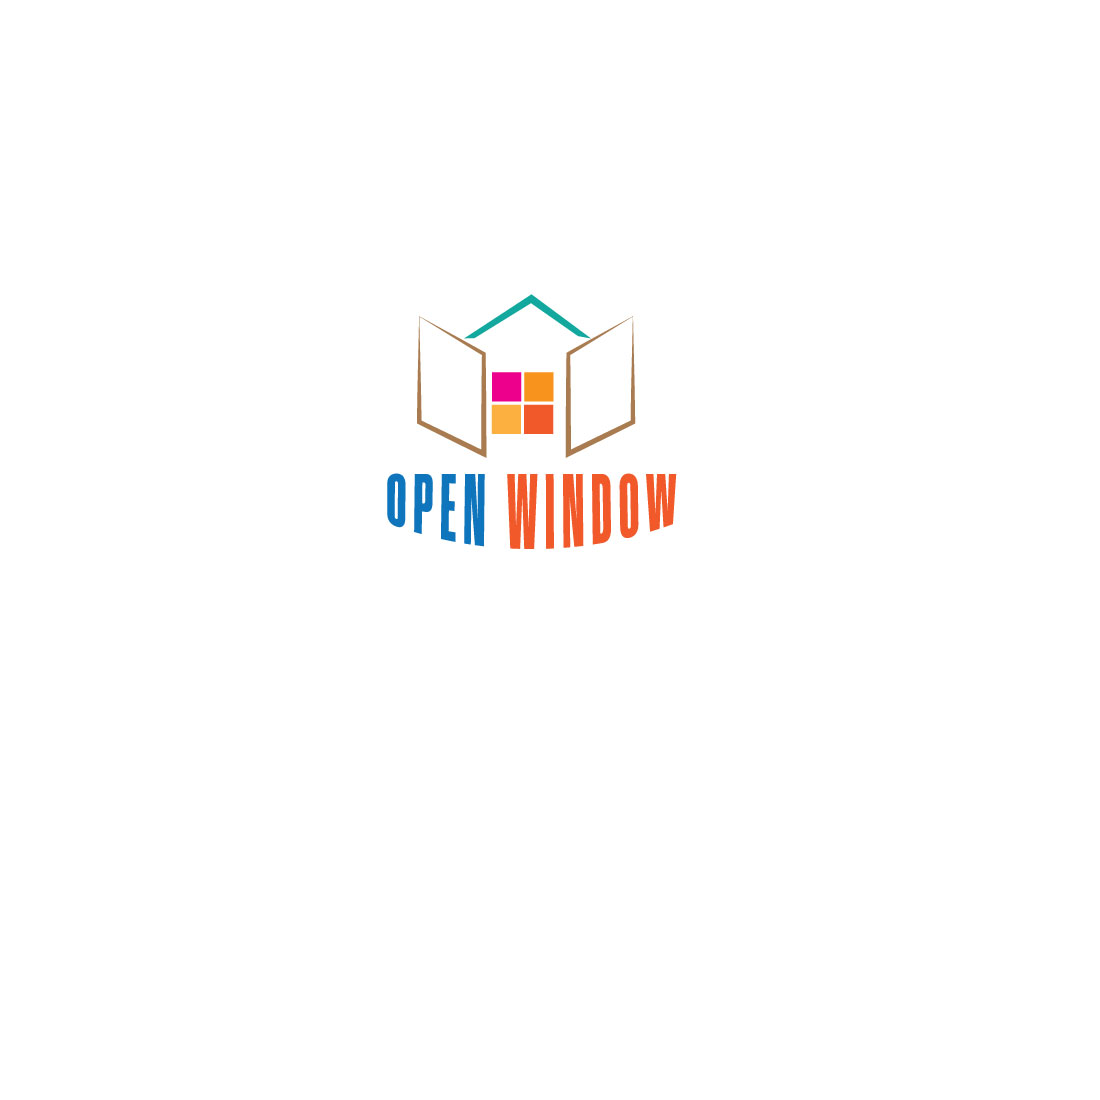 open window a building logo or illustration 40